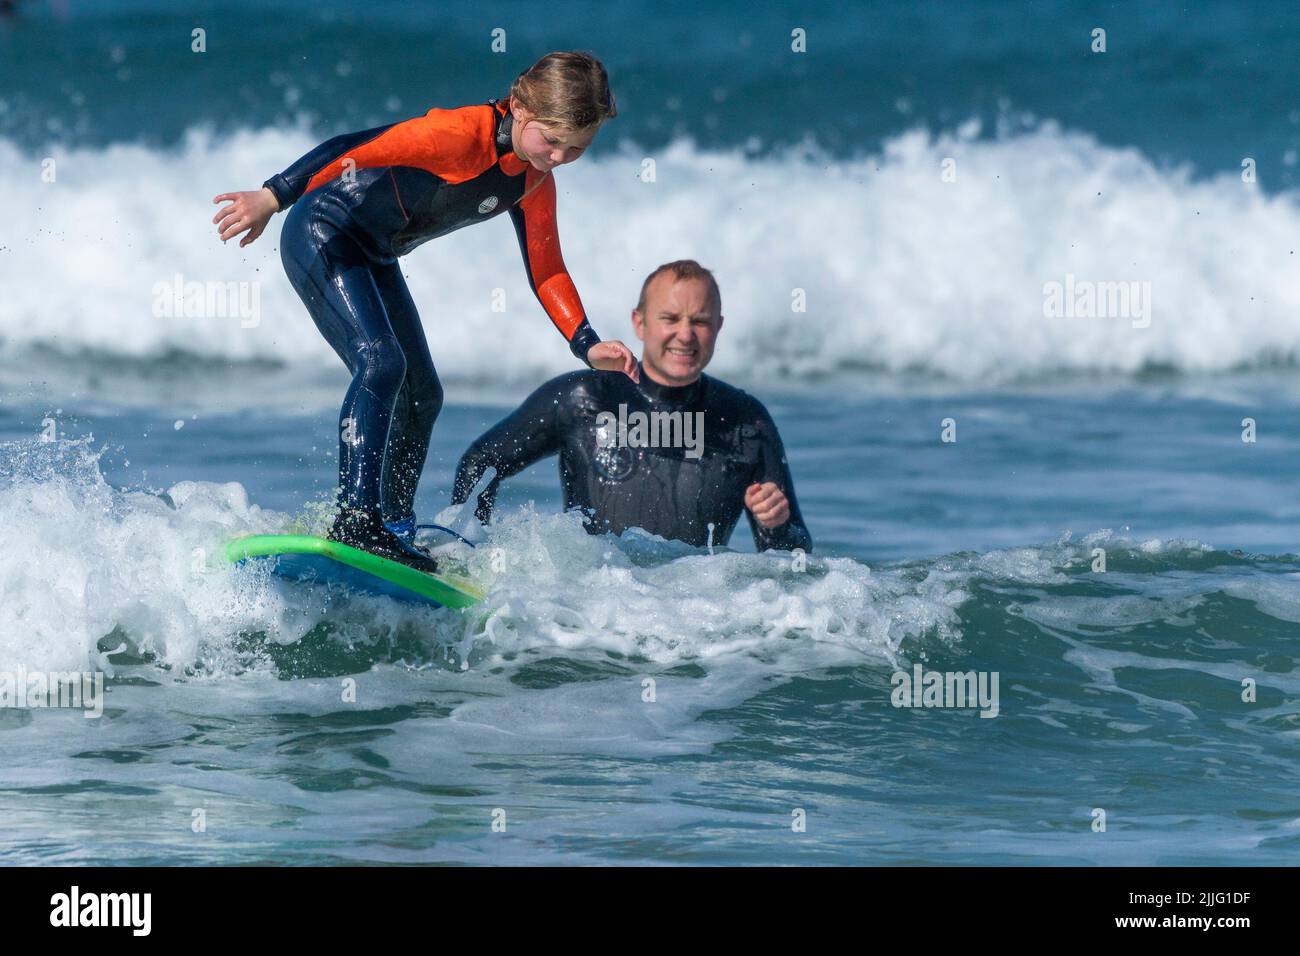 Georgina Fletcher aged 10 from St Austell learning to surf as her proud father watches on at Fistral Beach in Newquay during unseasonably warm weather Stock Photo